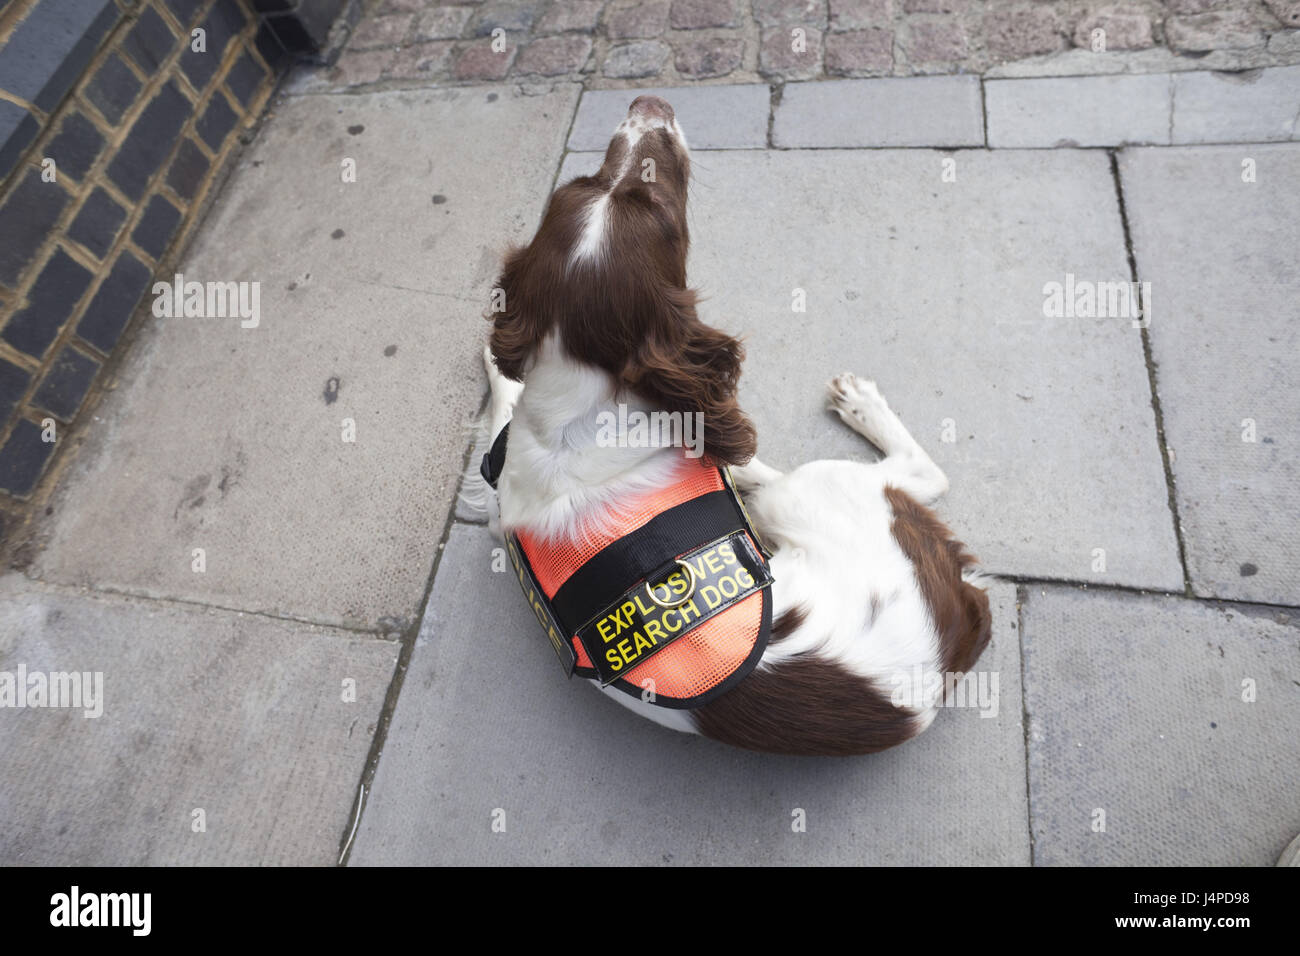 Great Britain, England, London, explosive search dog, Stock Photo